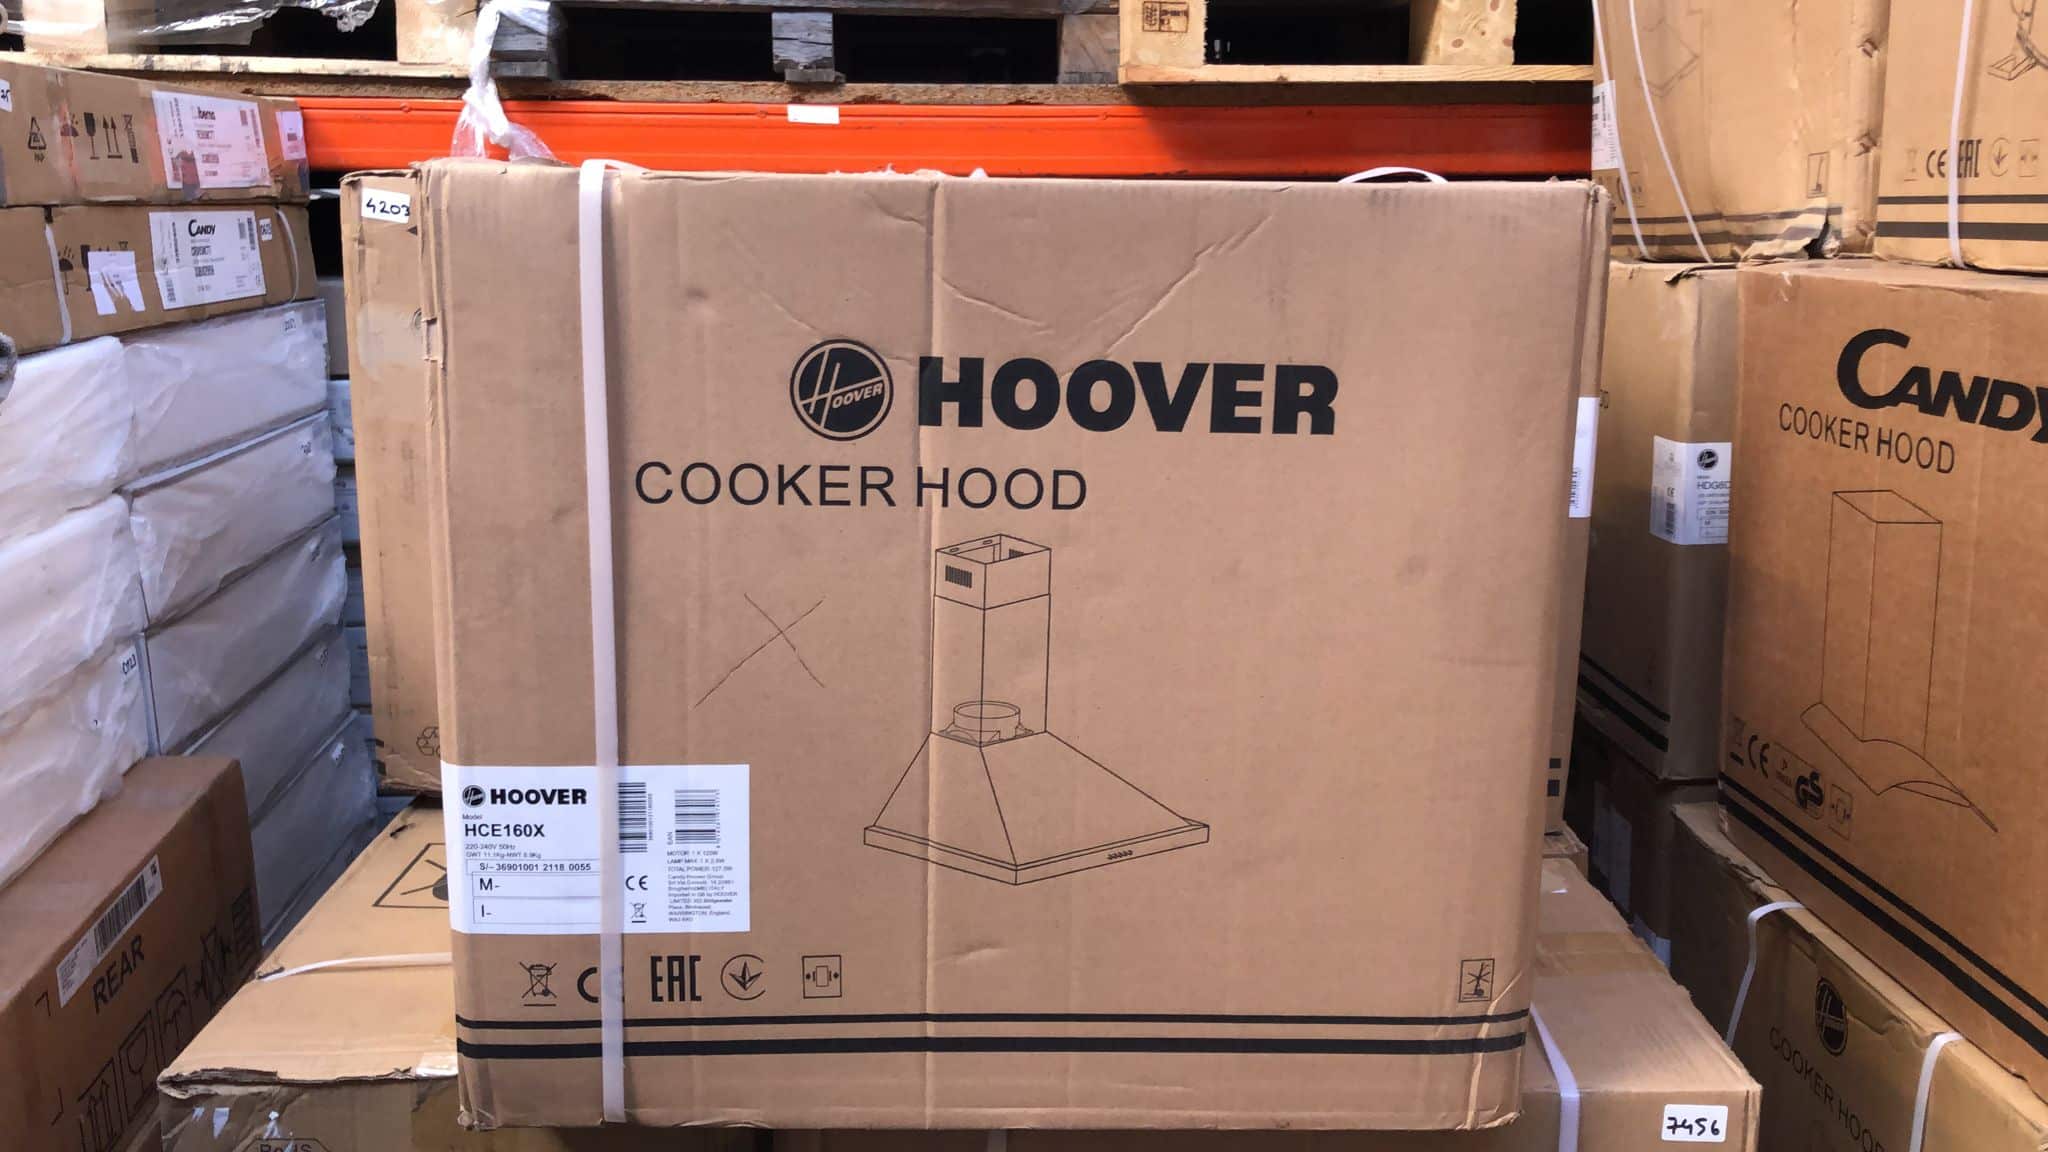 Hoover Chimney Cooker Hood Stainless steel  60cm Silver HCE160X 4173